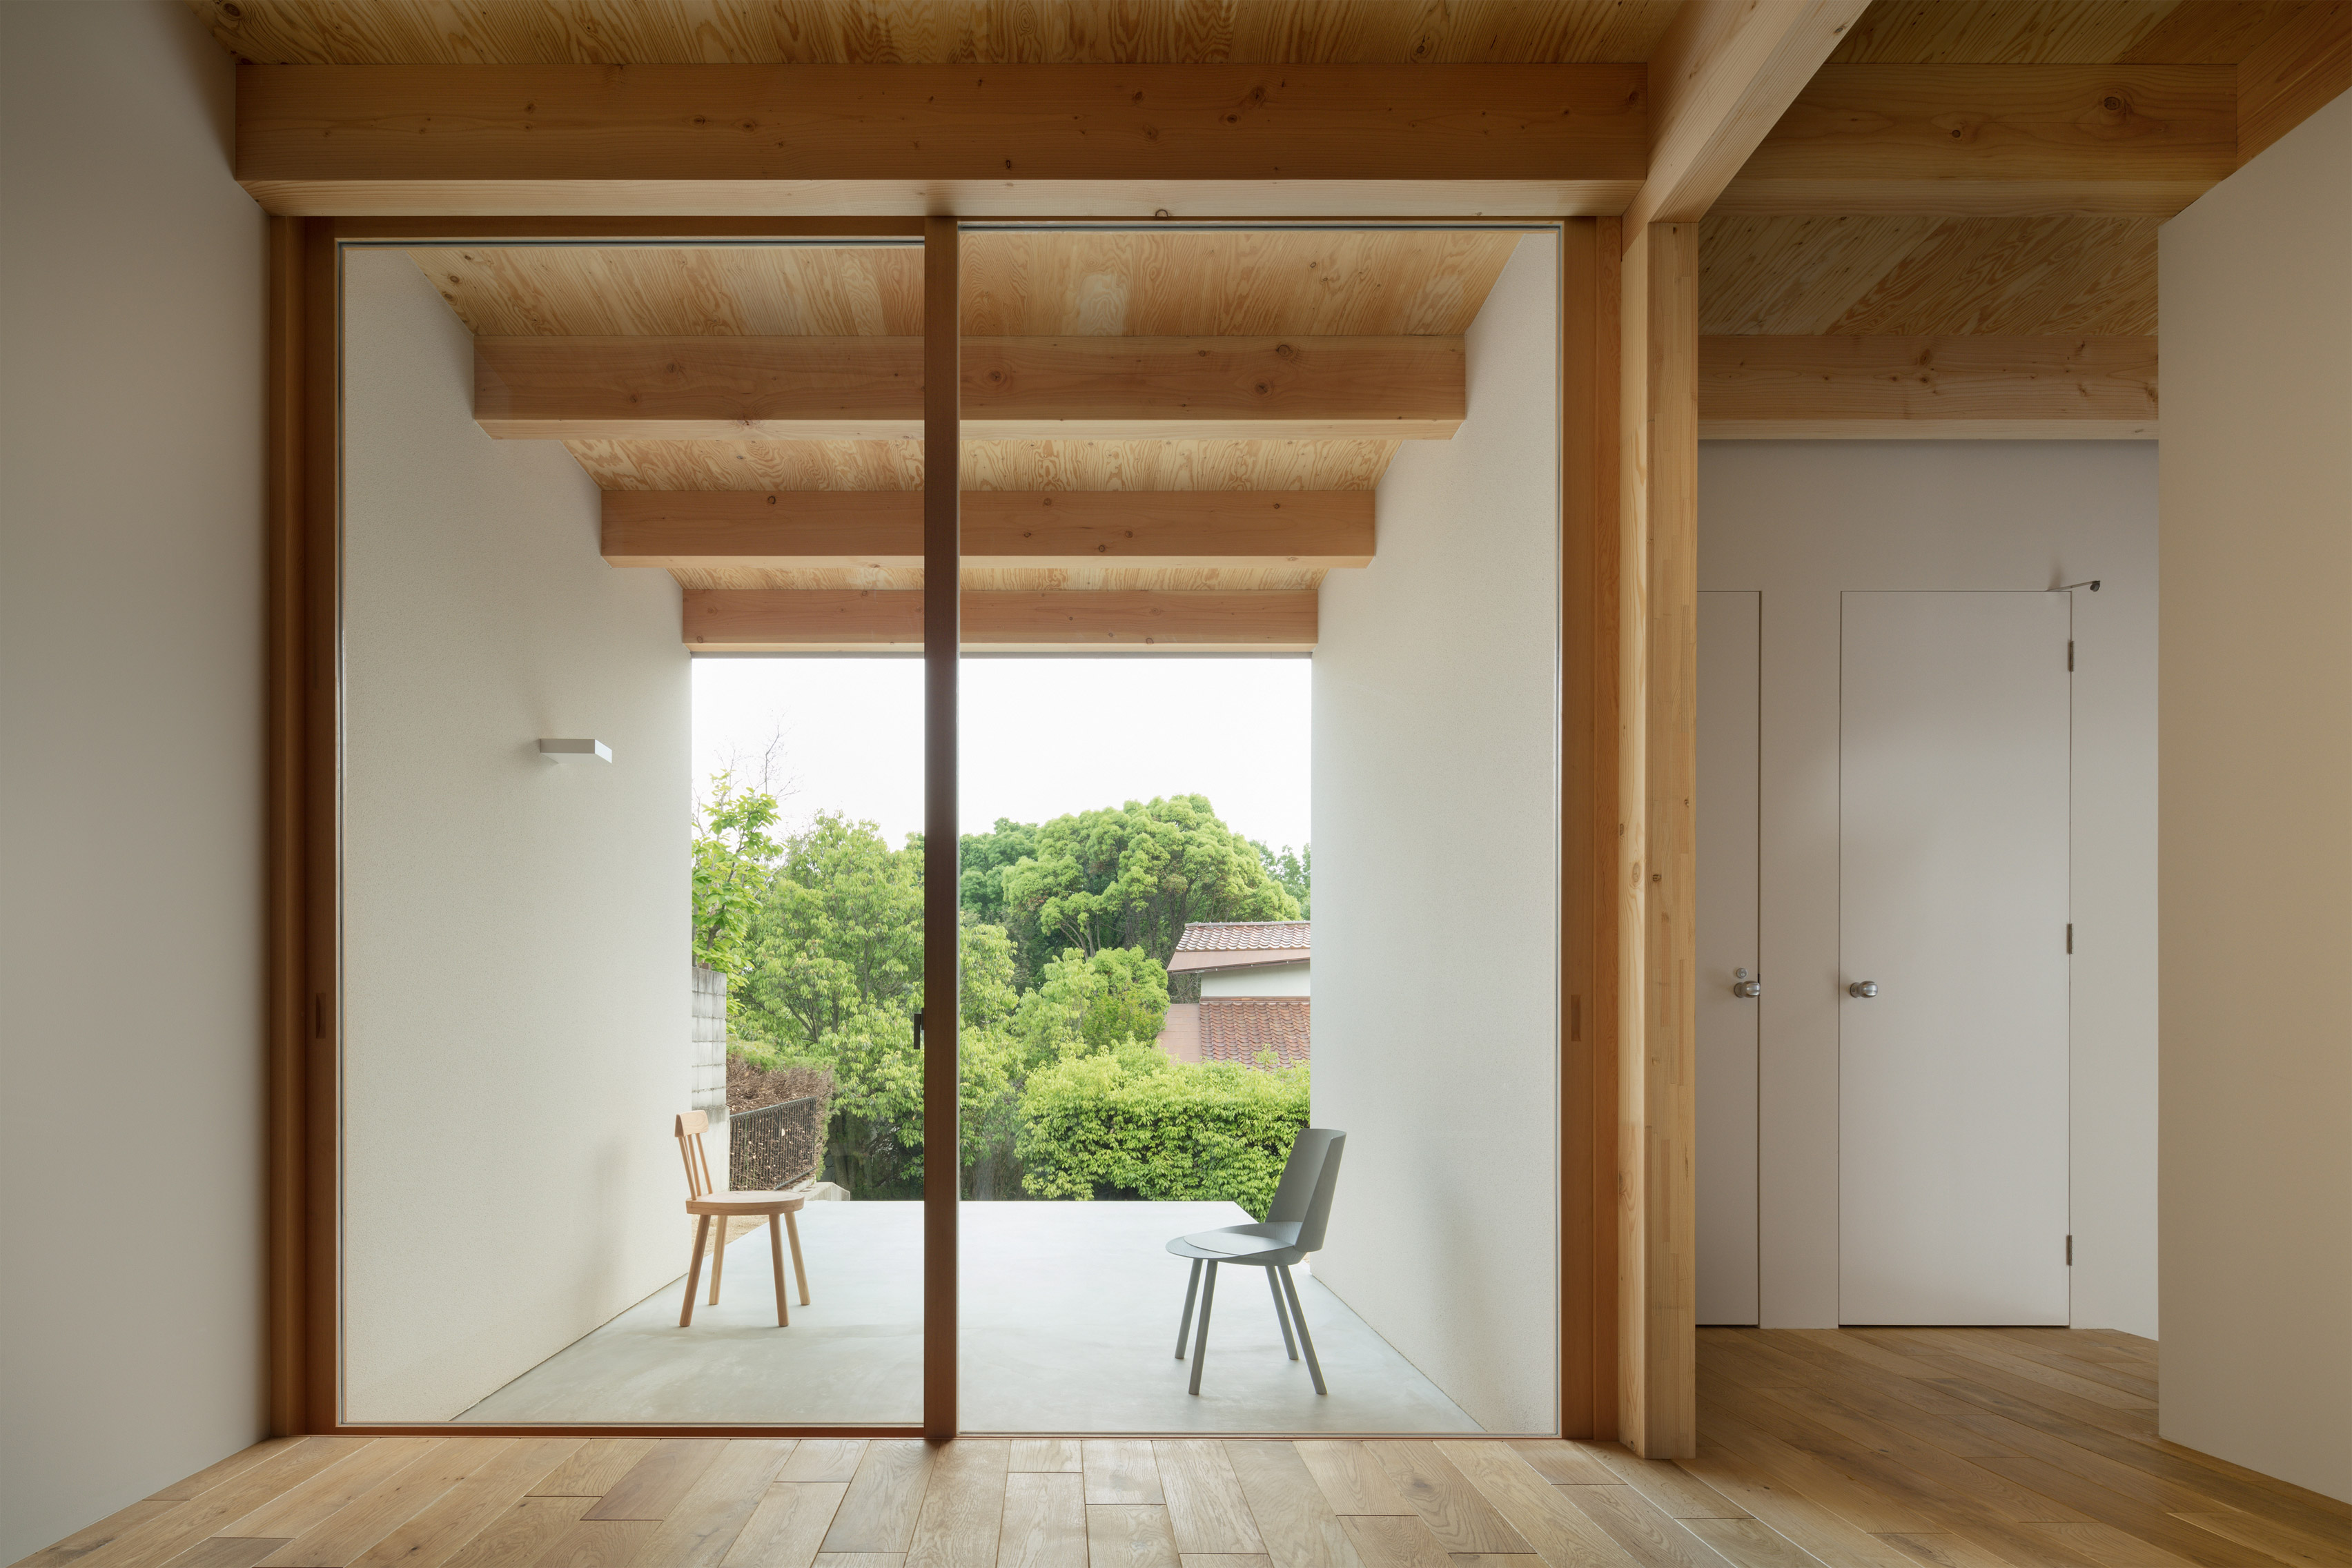 House in Mikage by Sides Core contrasts white surfaces with exposed wooden beams